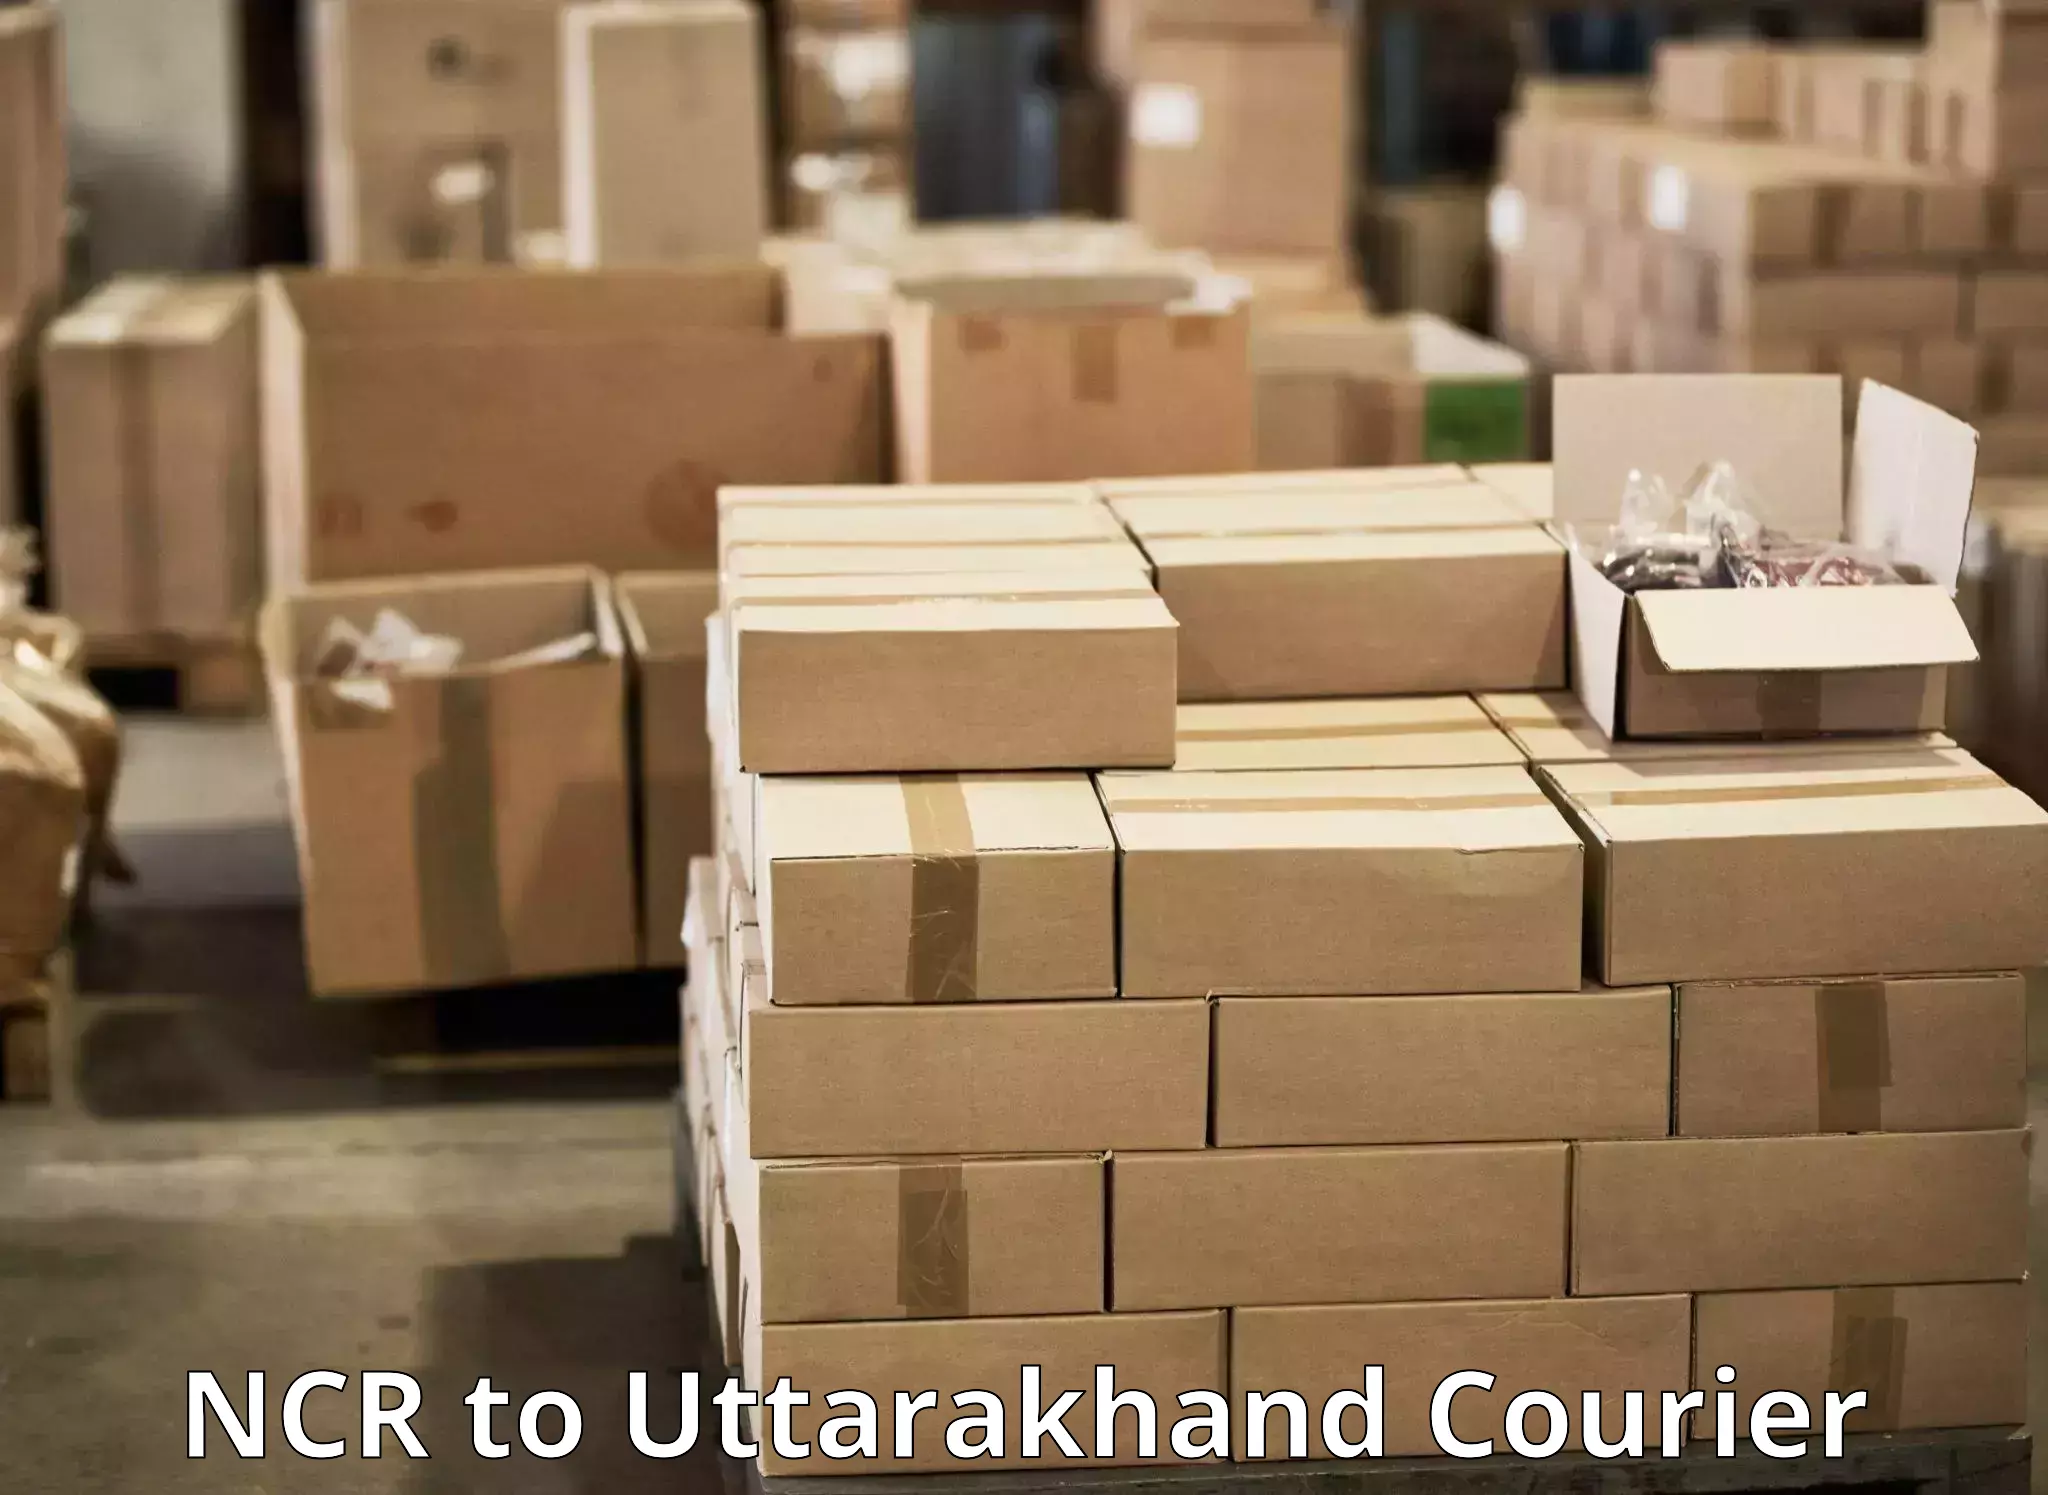 Courier service innovation NCR to IIT Roorkee